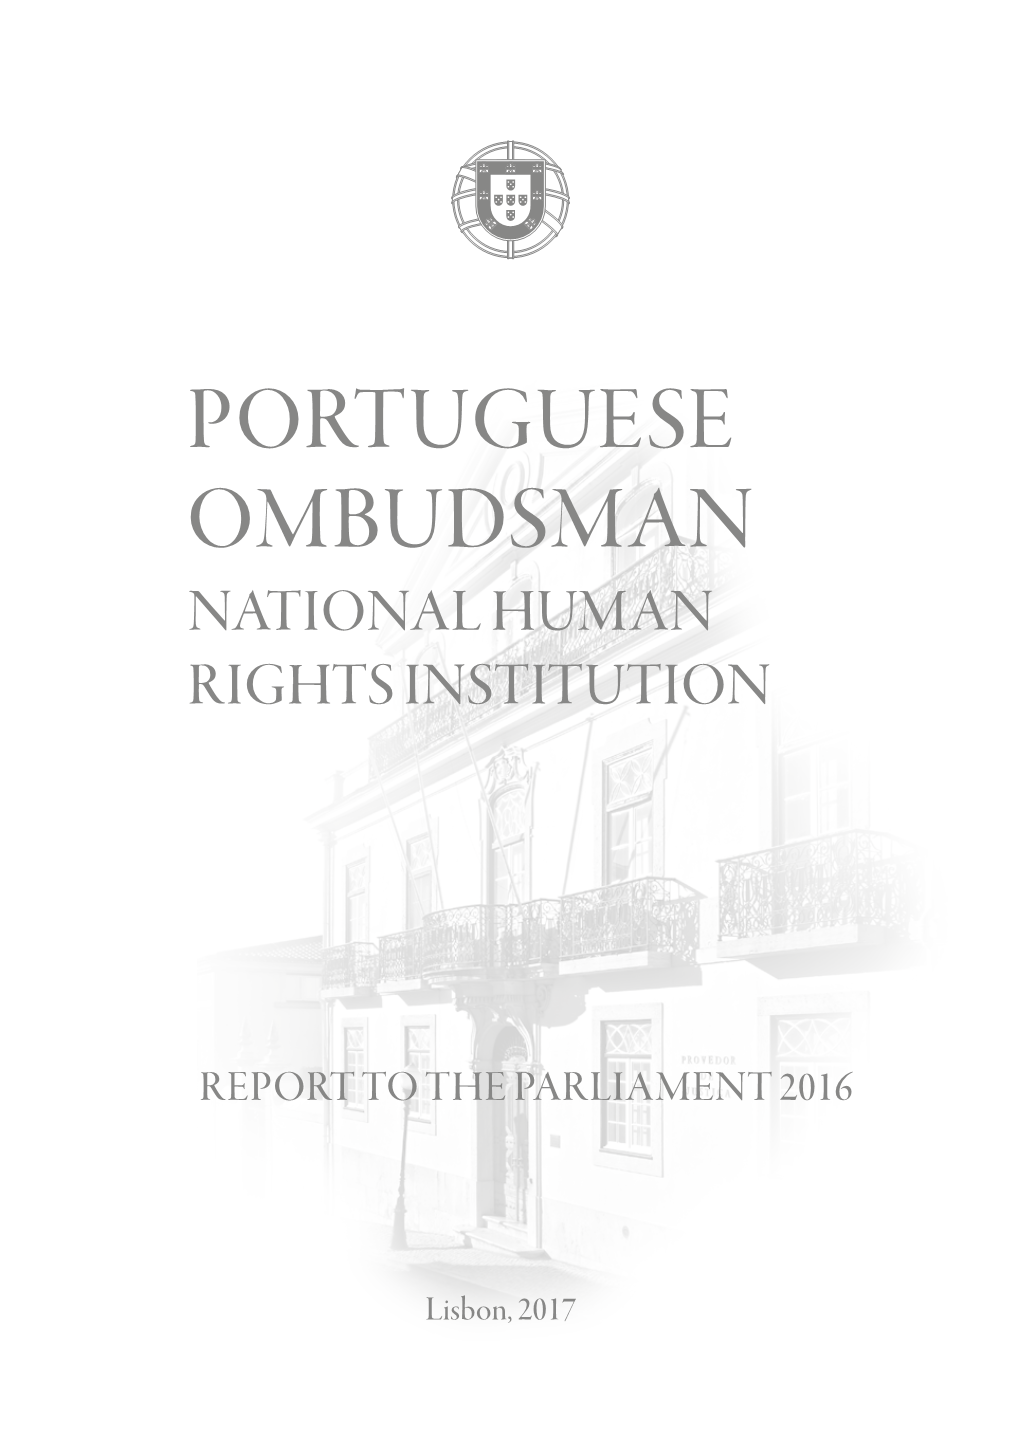 Portuguese Ombudsman Report to the Parliament (2016)